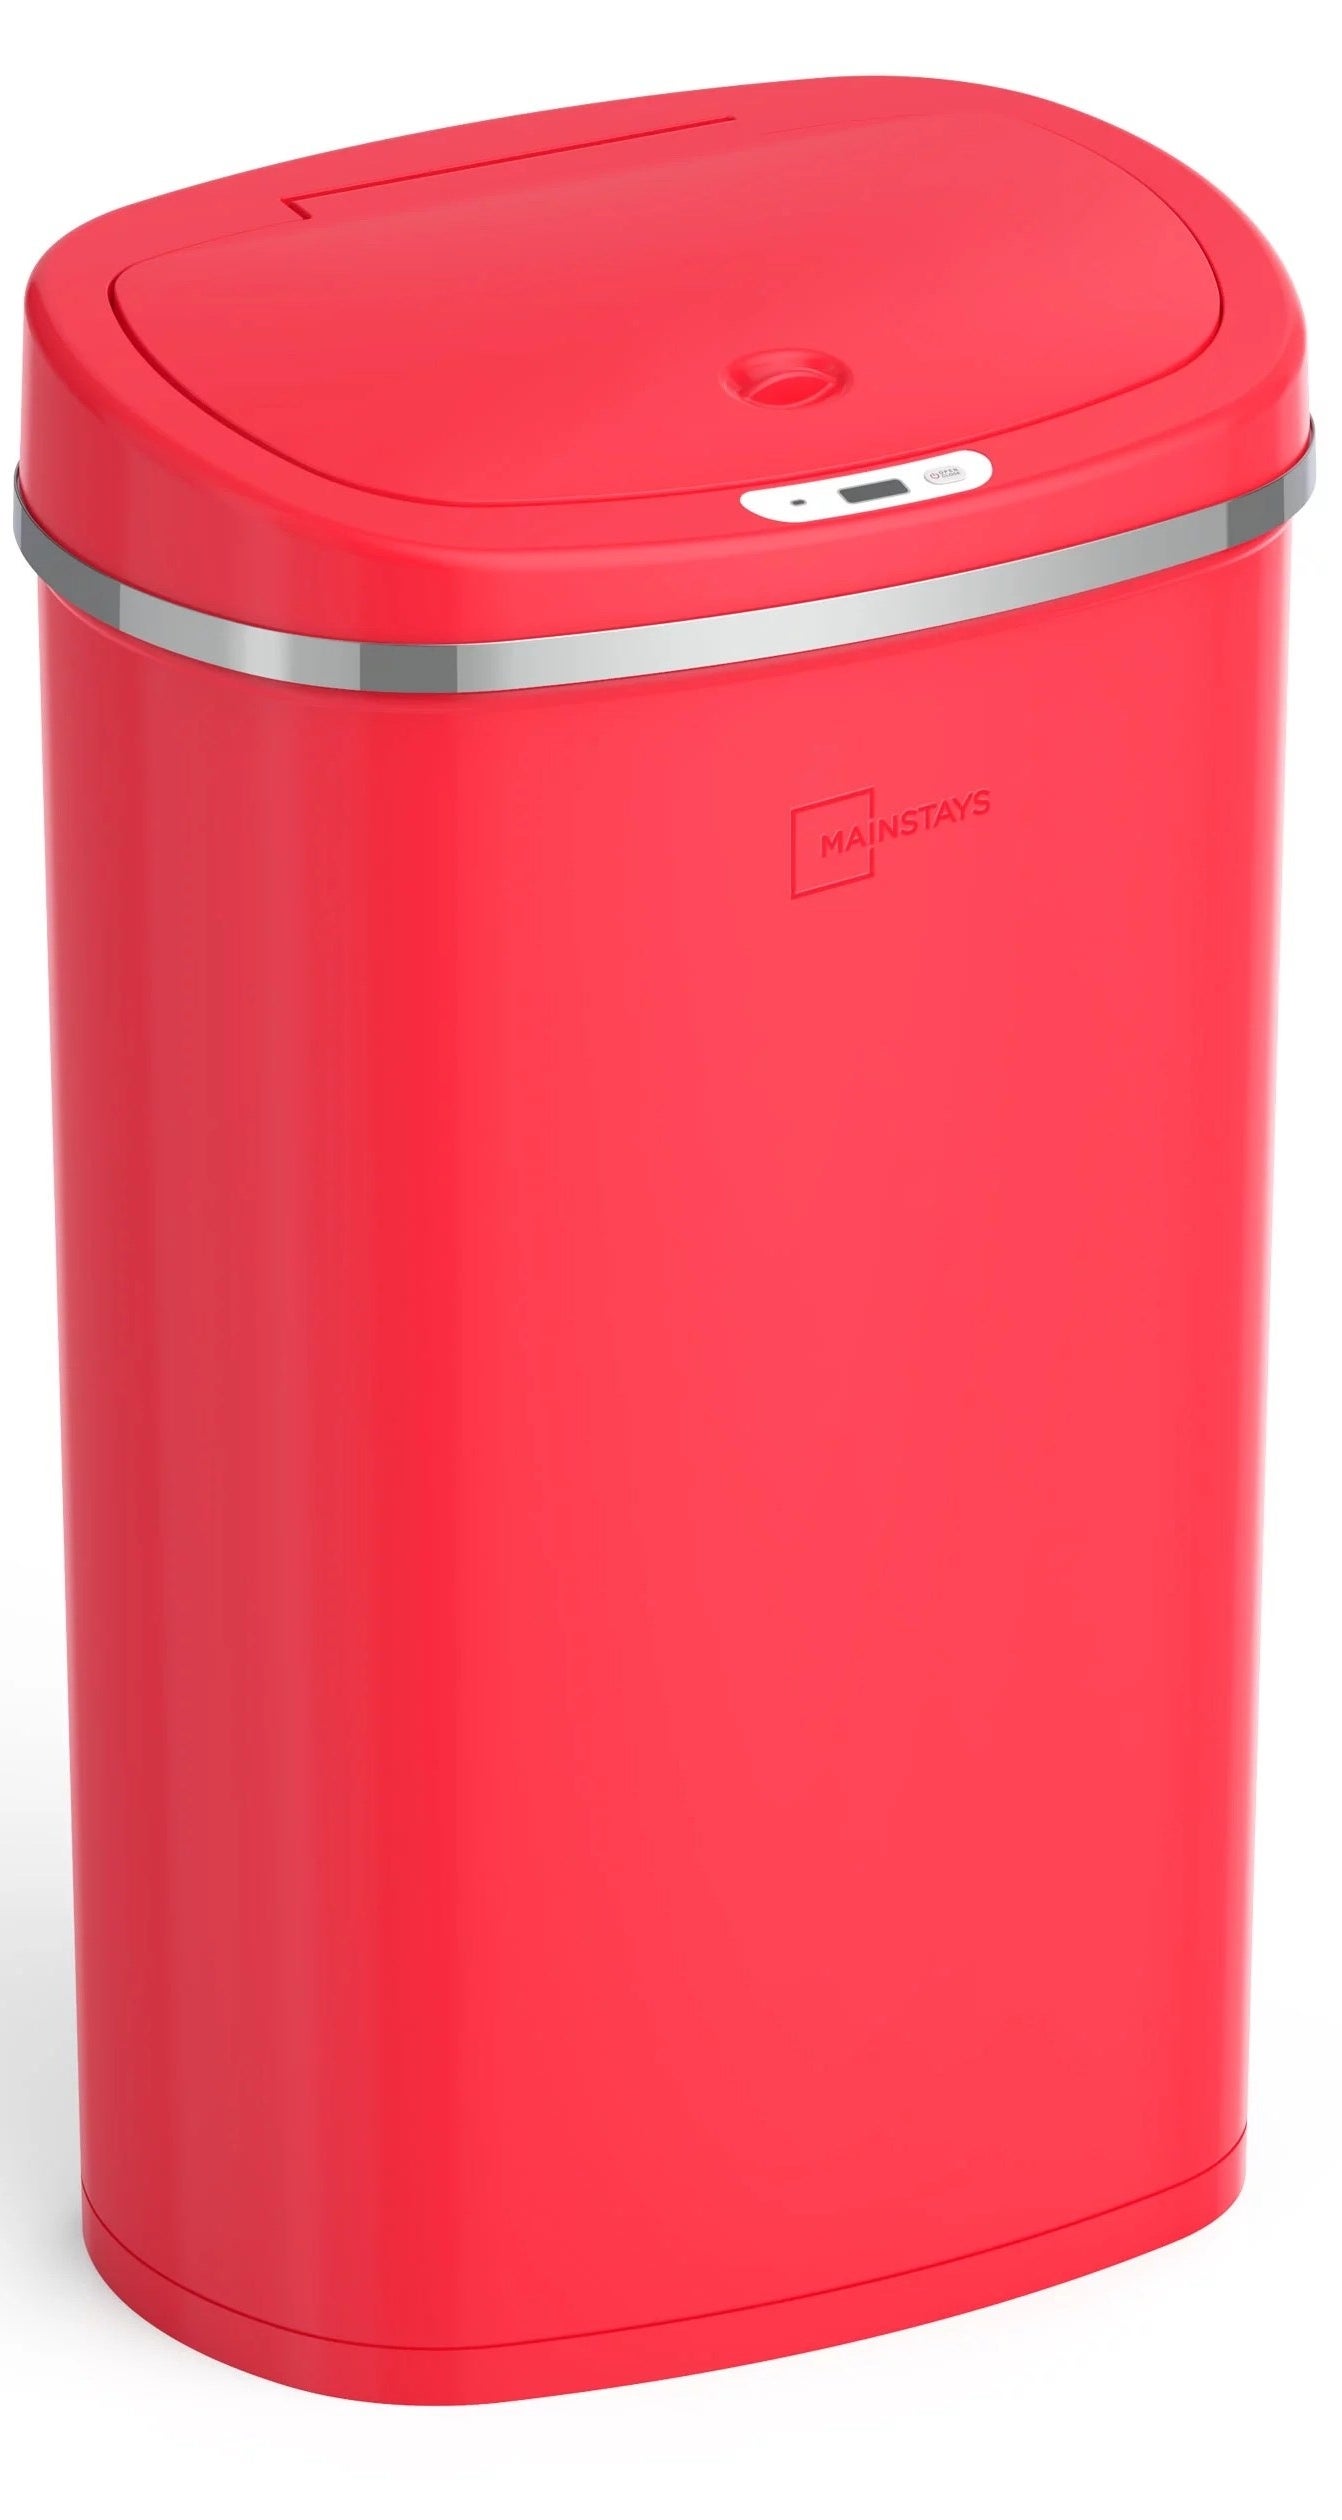 a red motion-detected garbage can